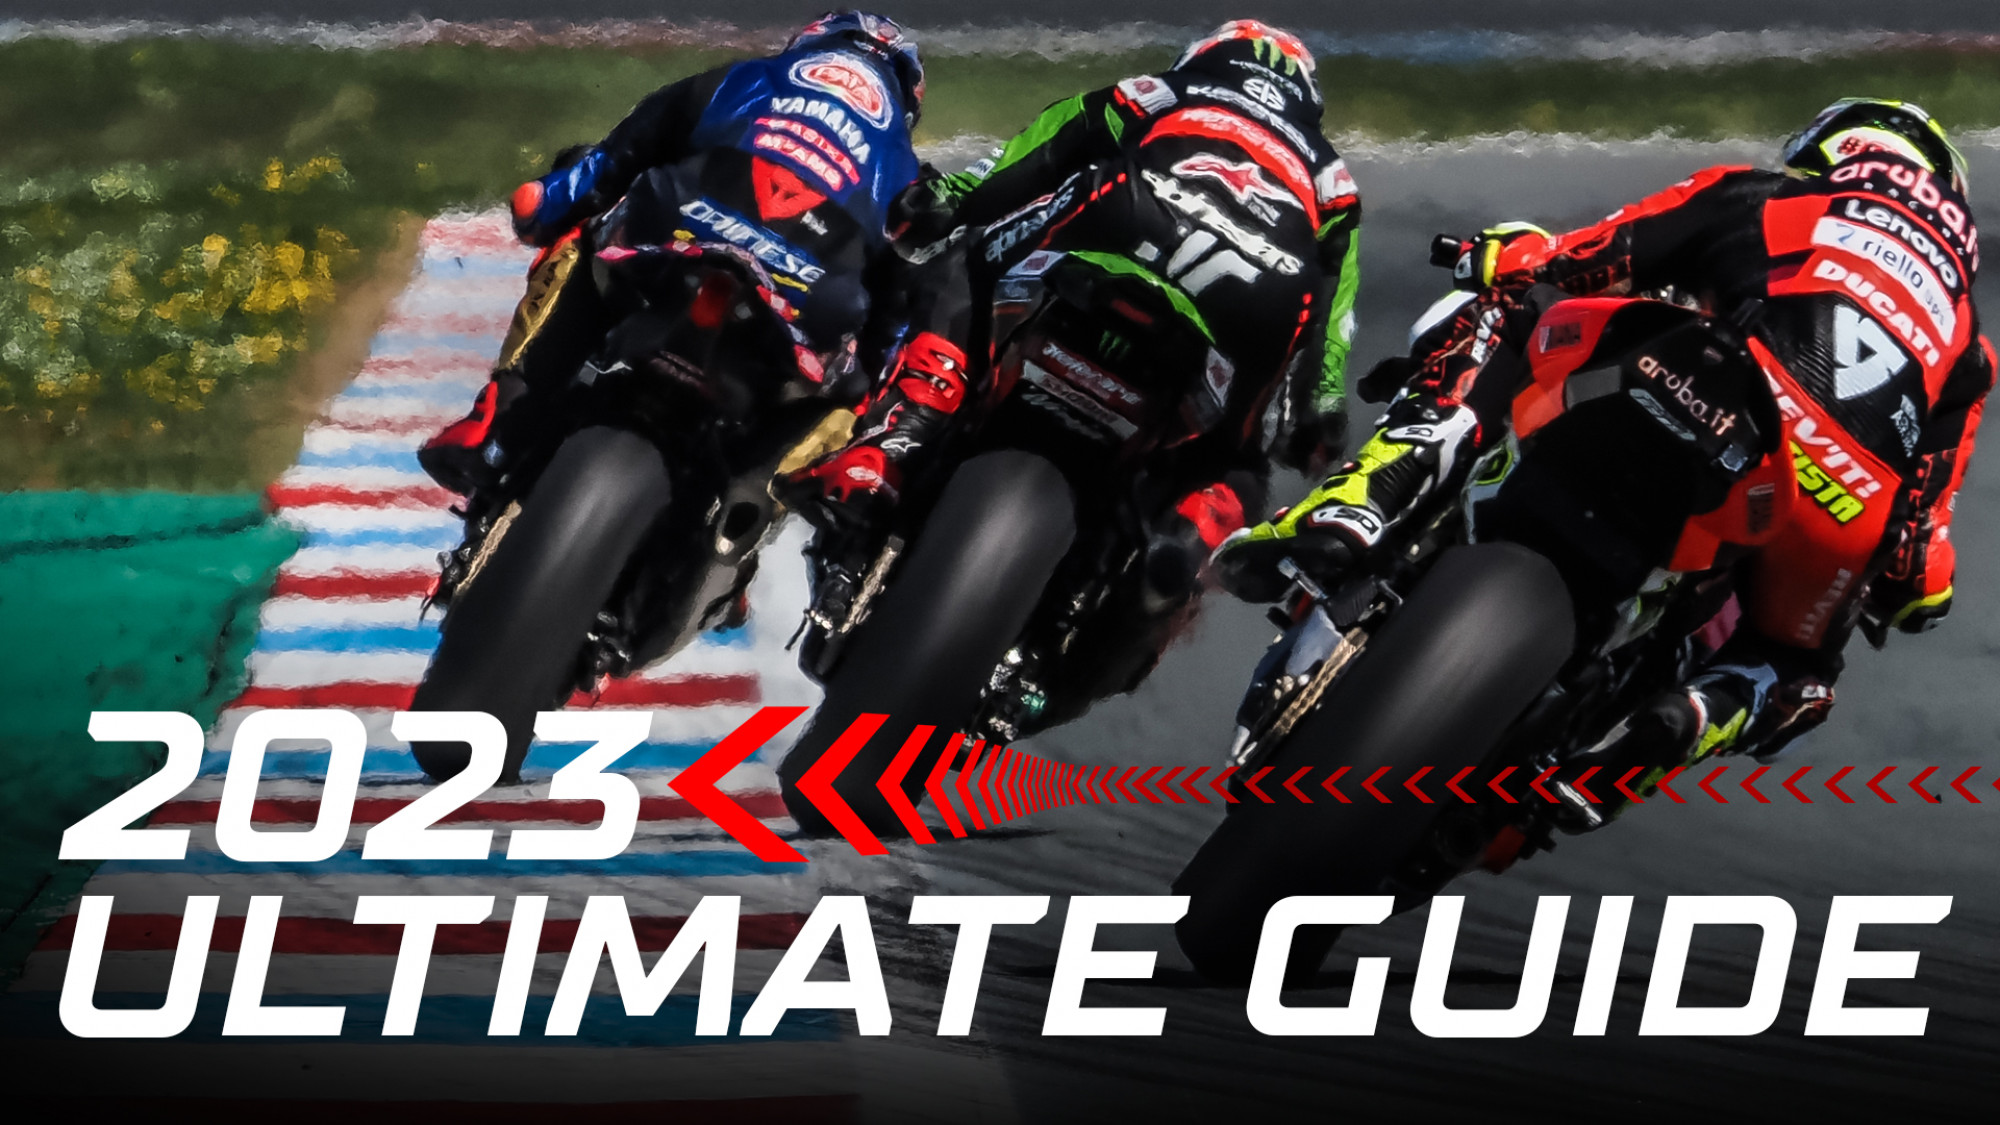 The Ultimate Guide to MotoGP Engines: Everything You Need to Know